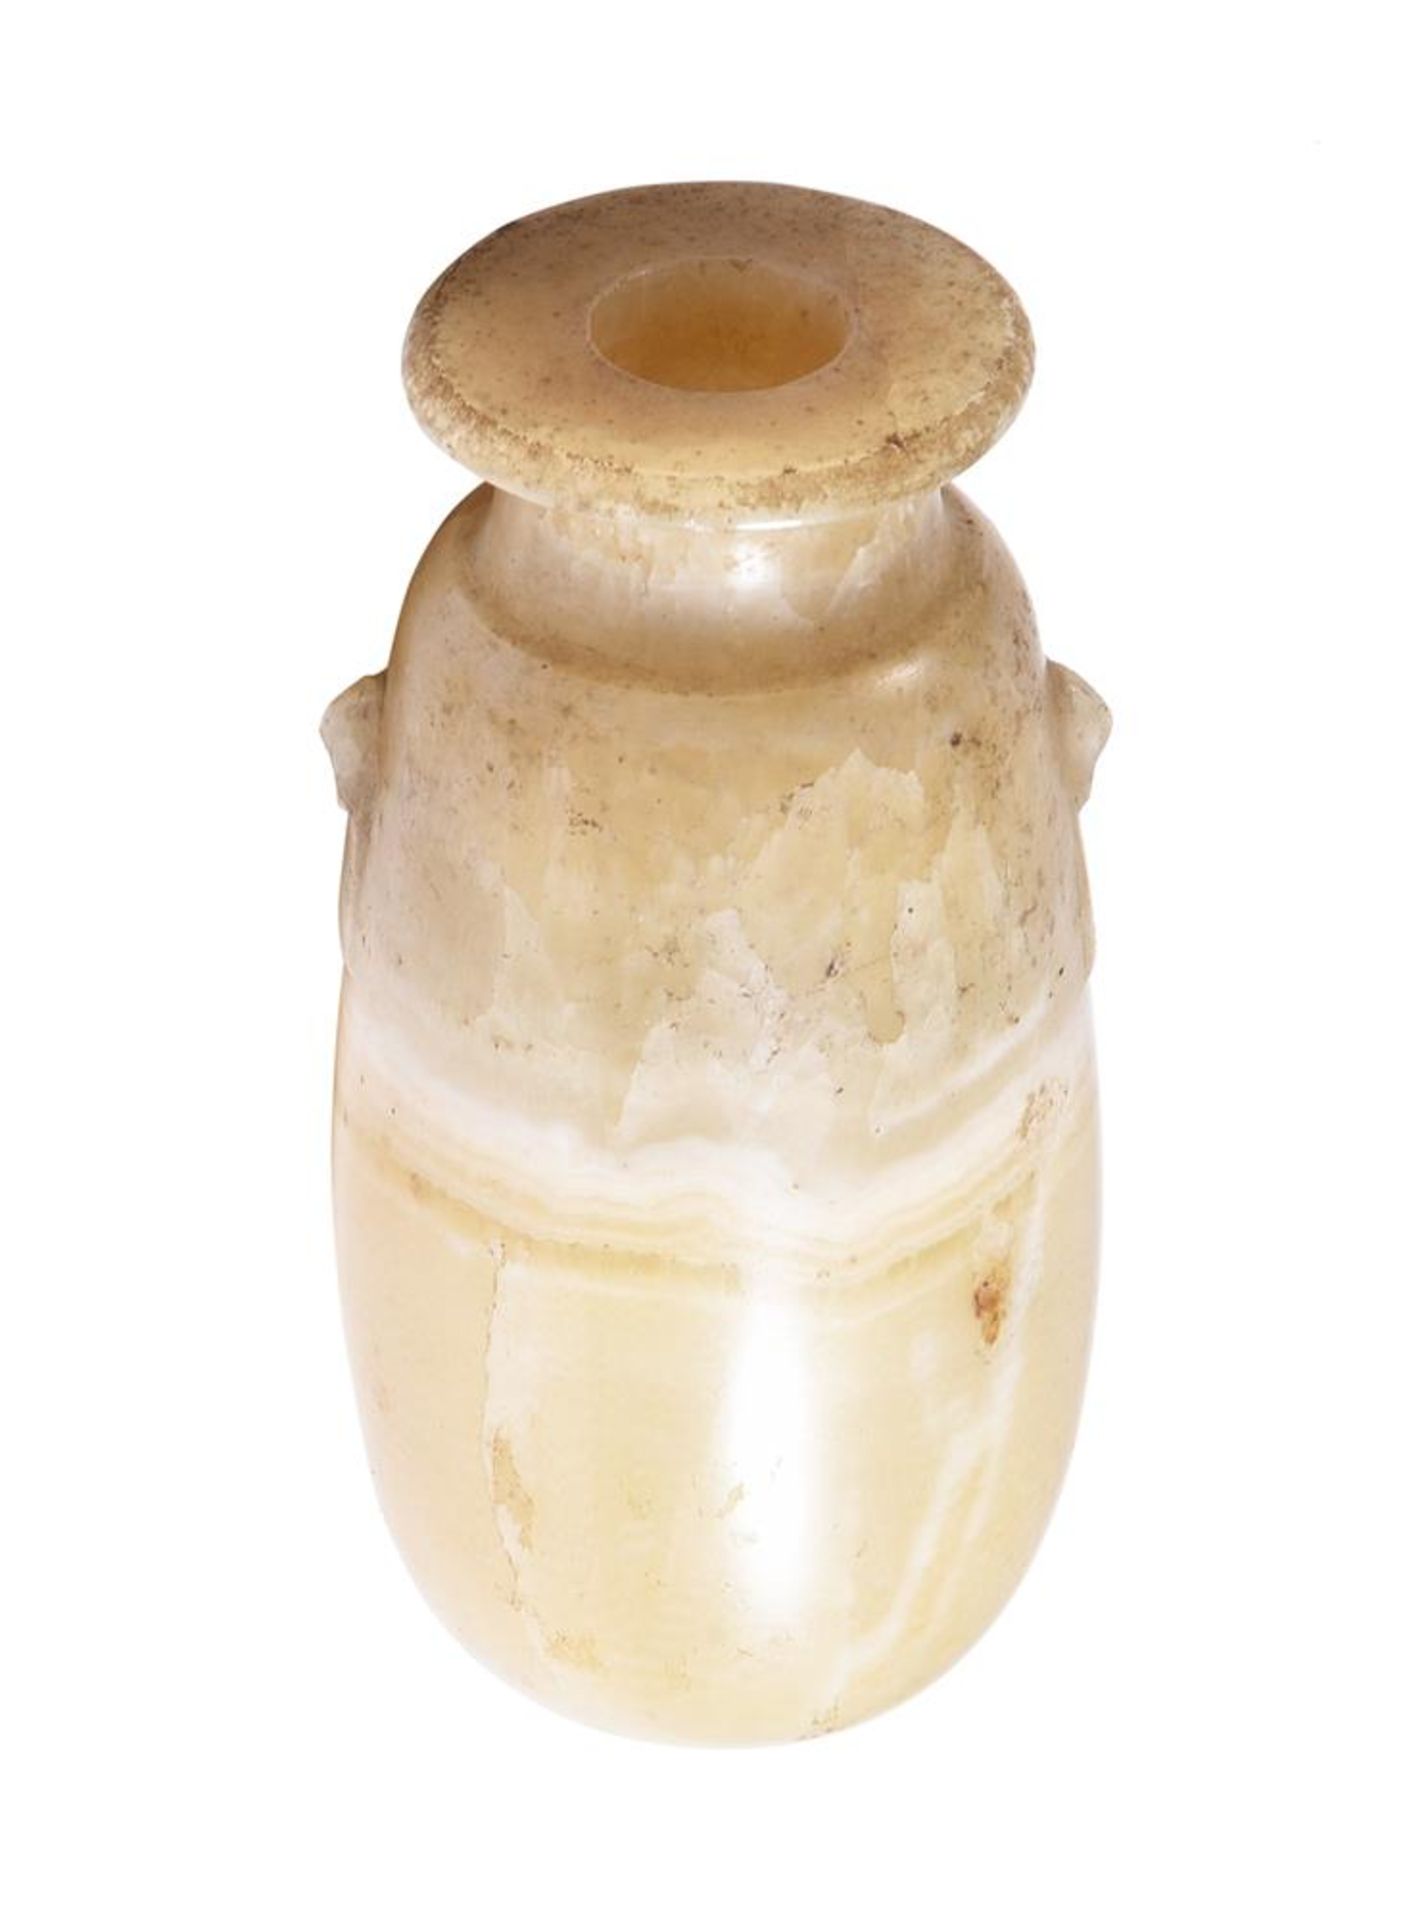 AN EGYPTIAN ALABASTER ALABASTRON, LATE PERIOD AFTER 600 B.C. - Image 3 of 3